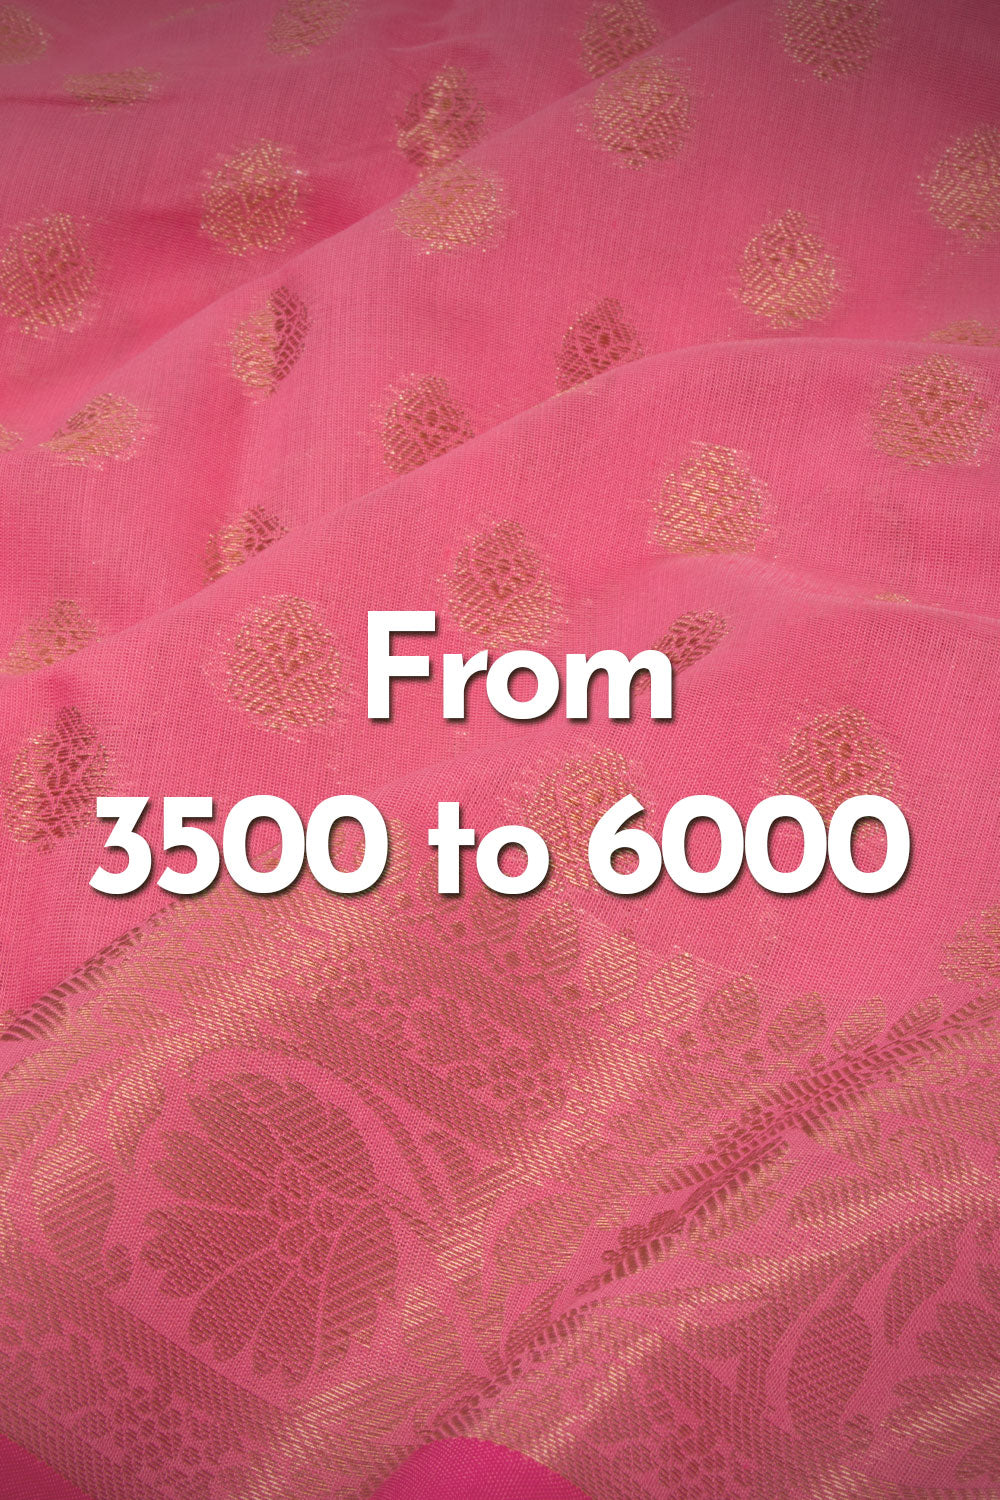 Sarees from 3500 to 6000